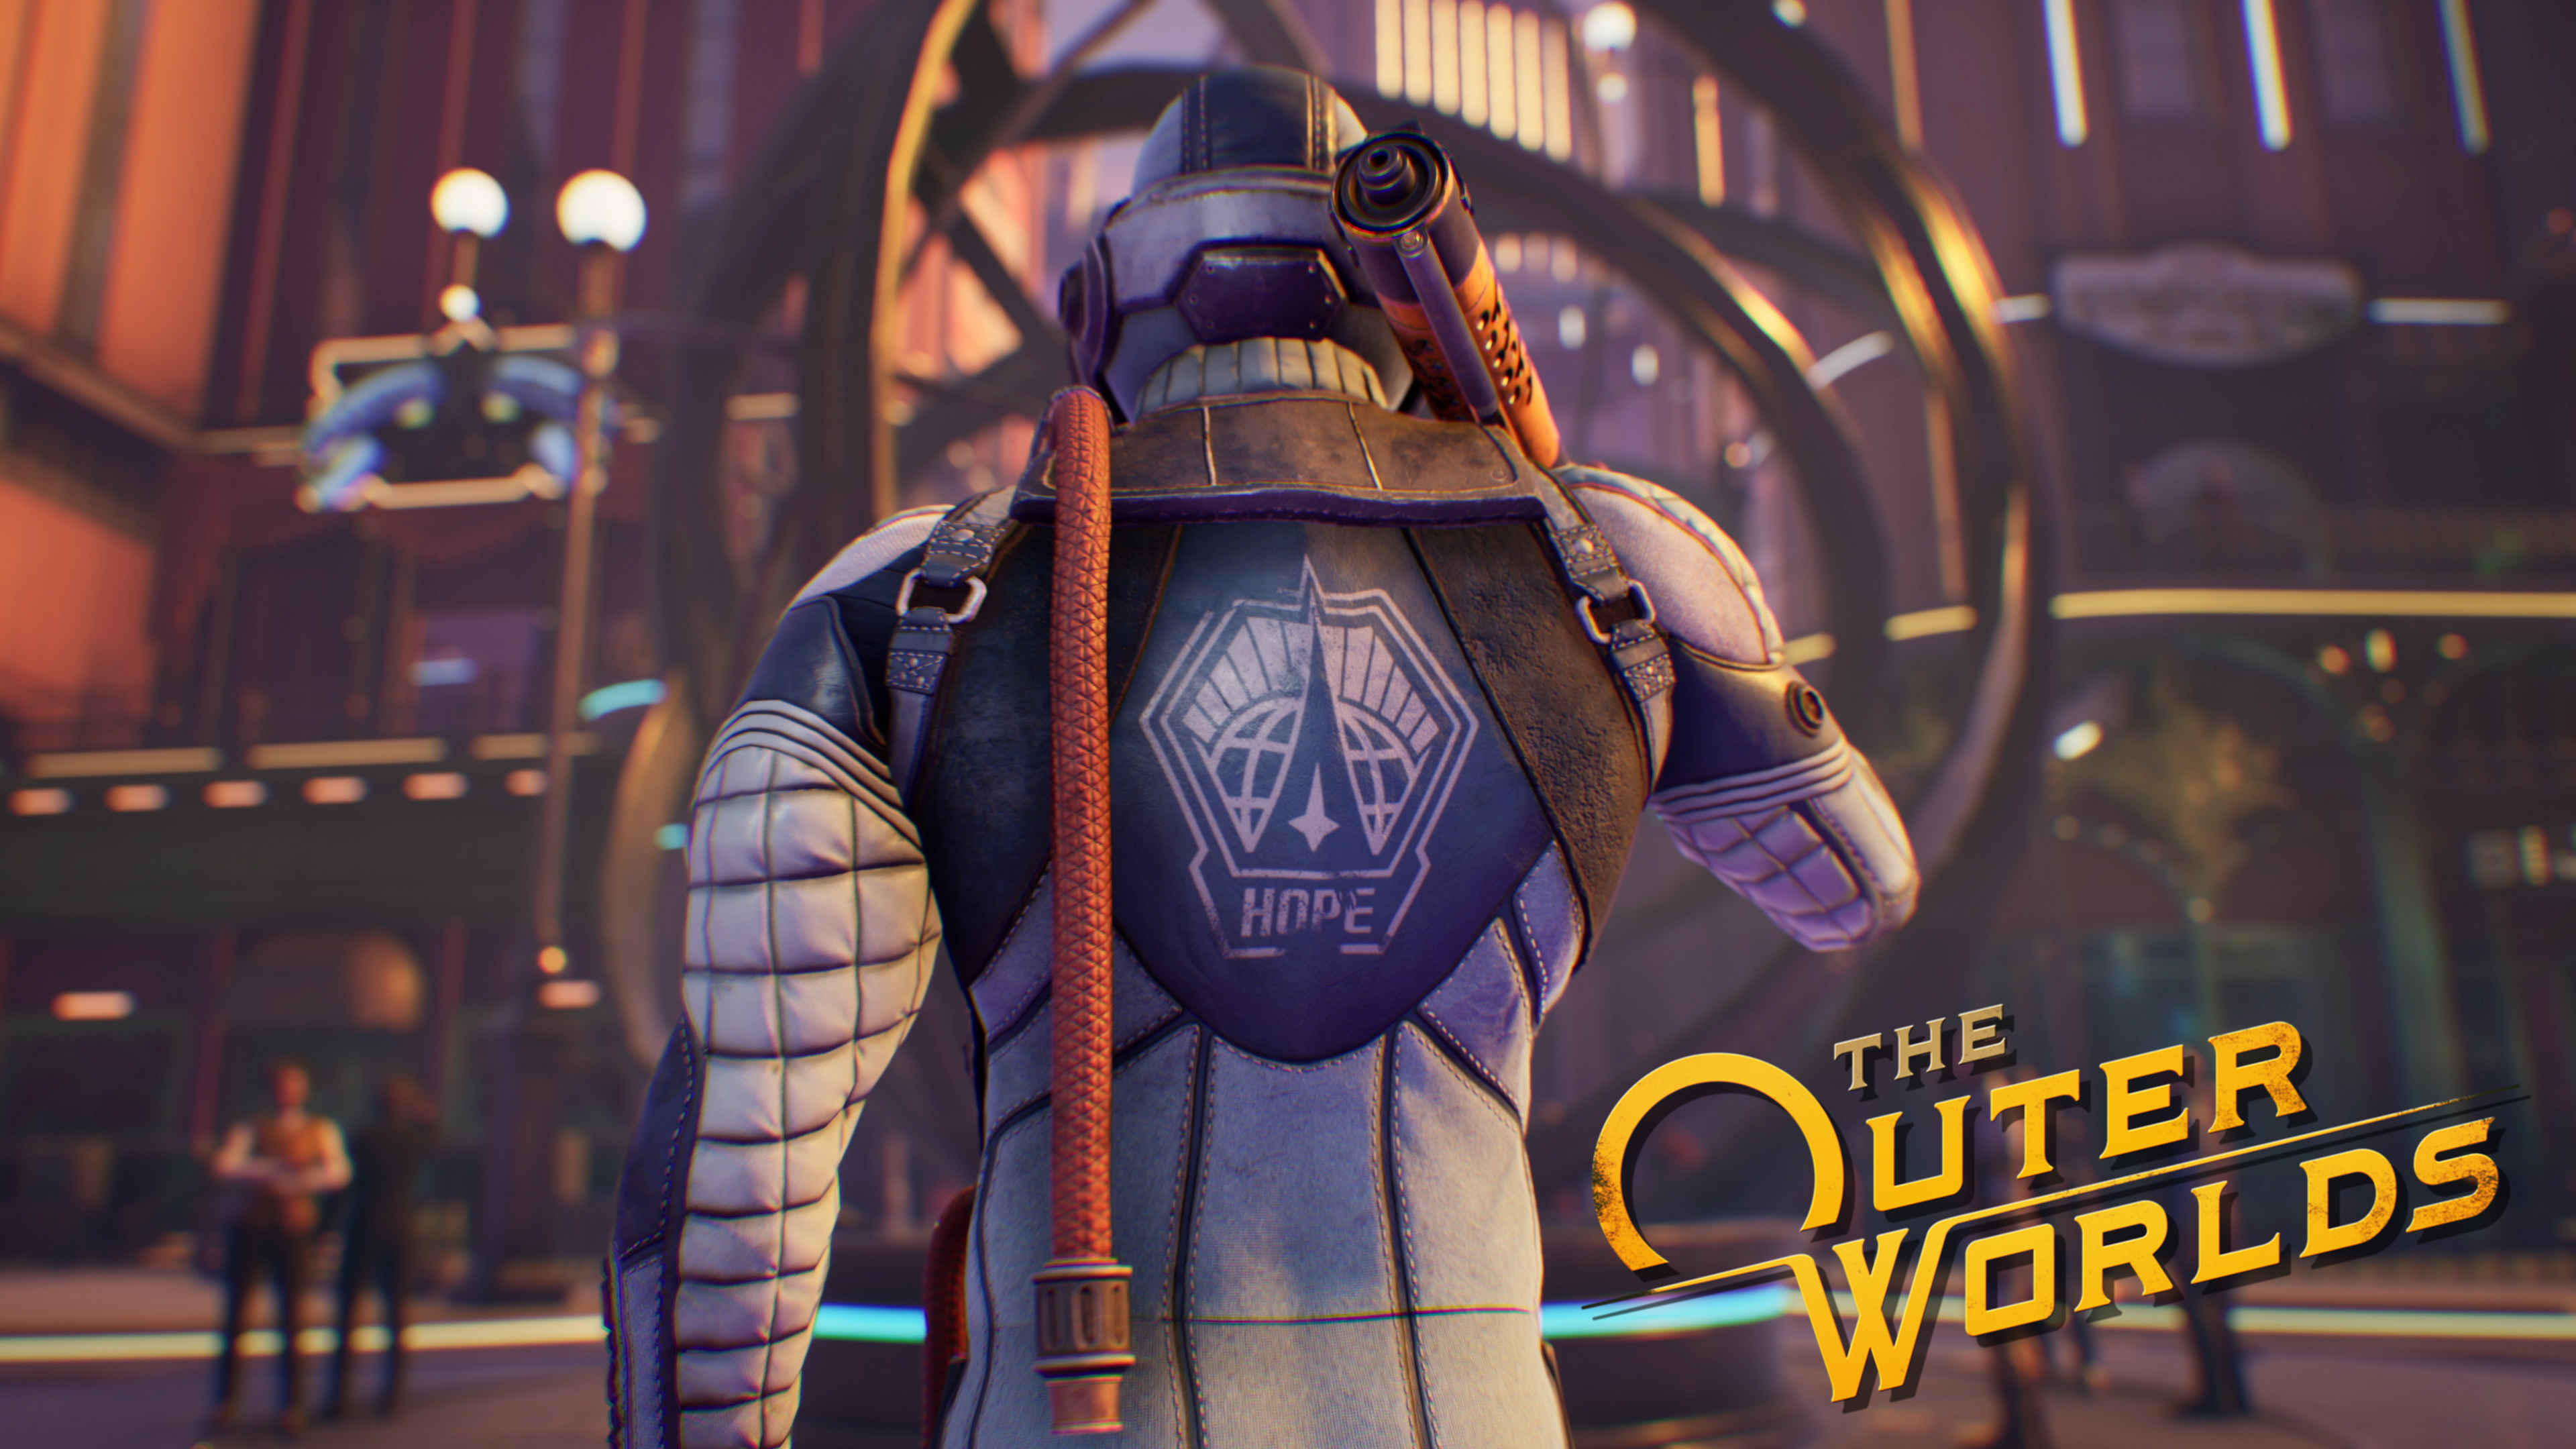 General 3840x2160 The Outer Worlds video games 2019 (year) PC gaming Obsidian Entertainment